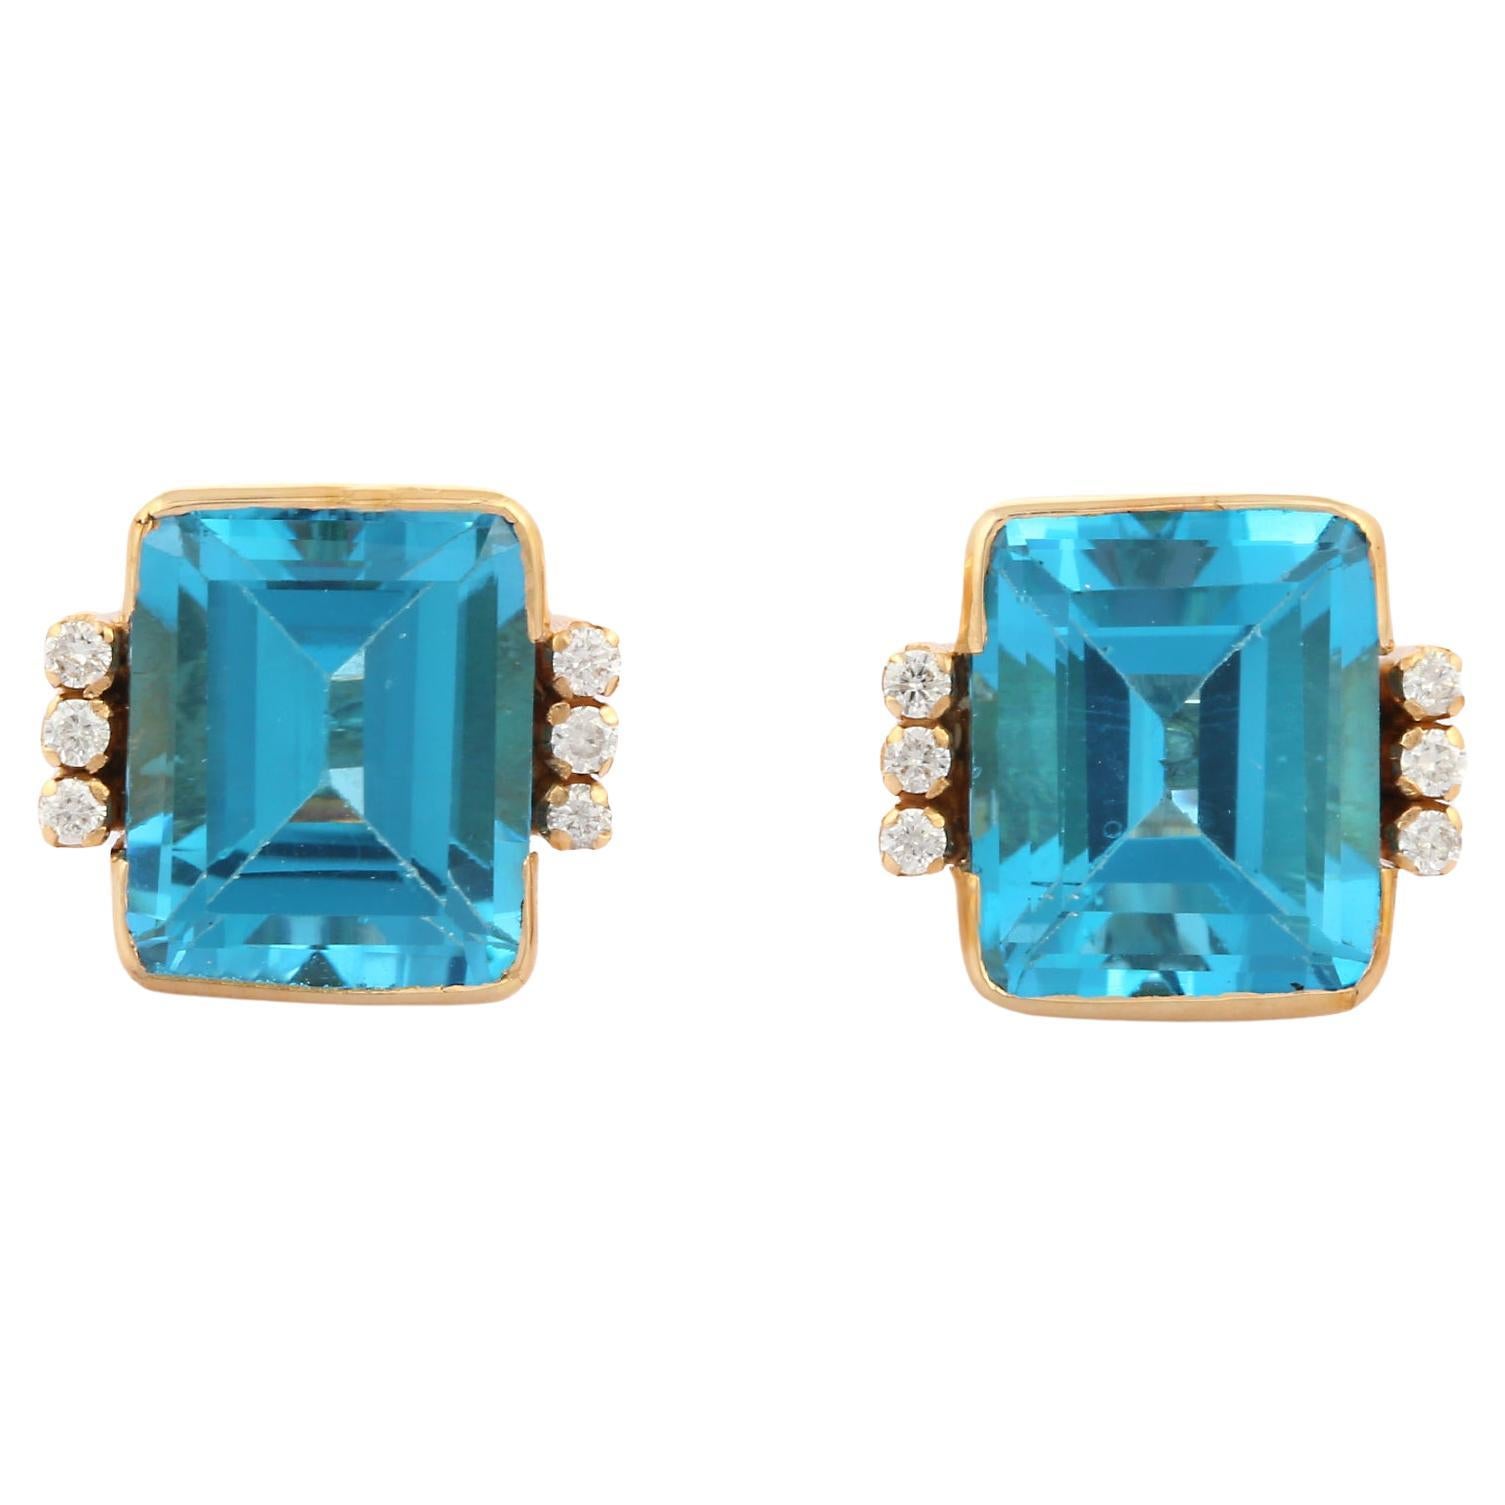 Genuine Blue Topaz 15.15 Ct Stud Earrings with Diamonds in 18K Yellow Gold For Sale